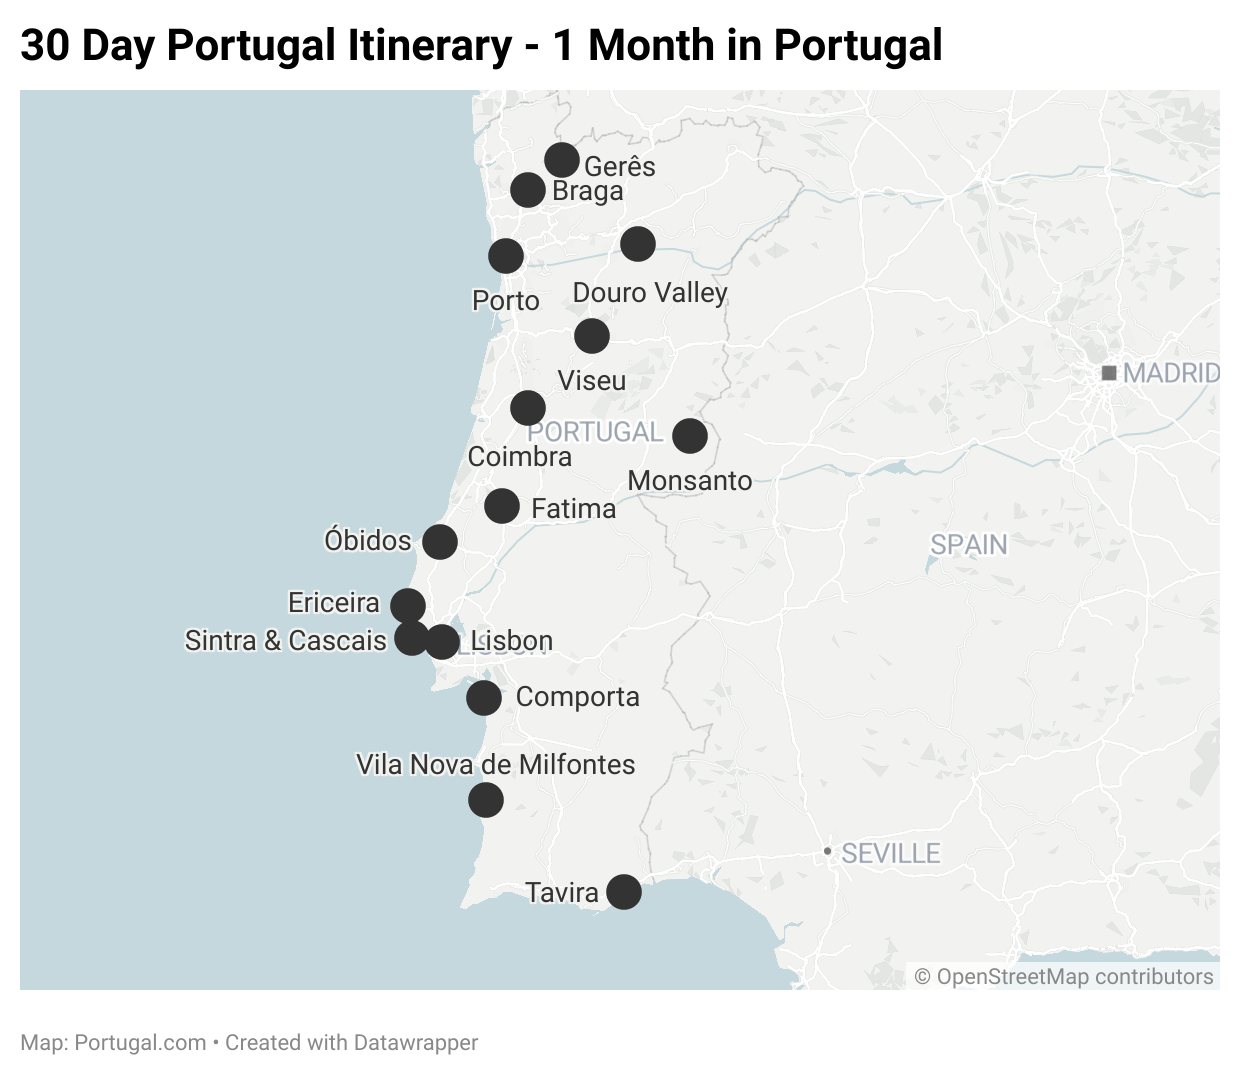 30 Day Portugal Itinerary: Explore Portugal in 1 Month